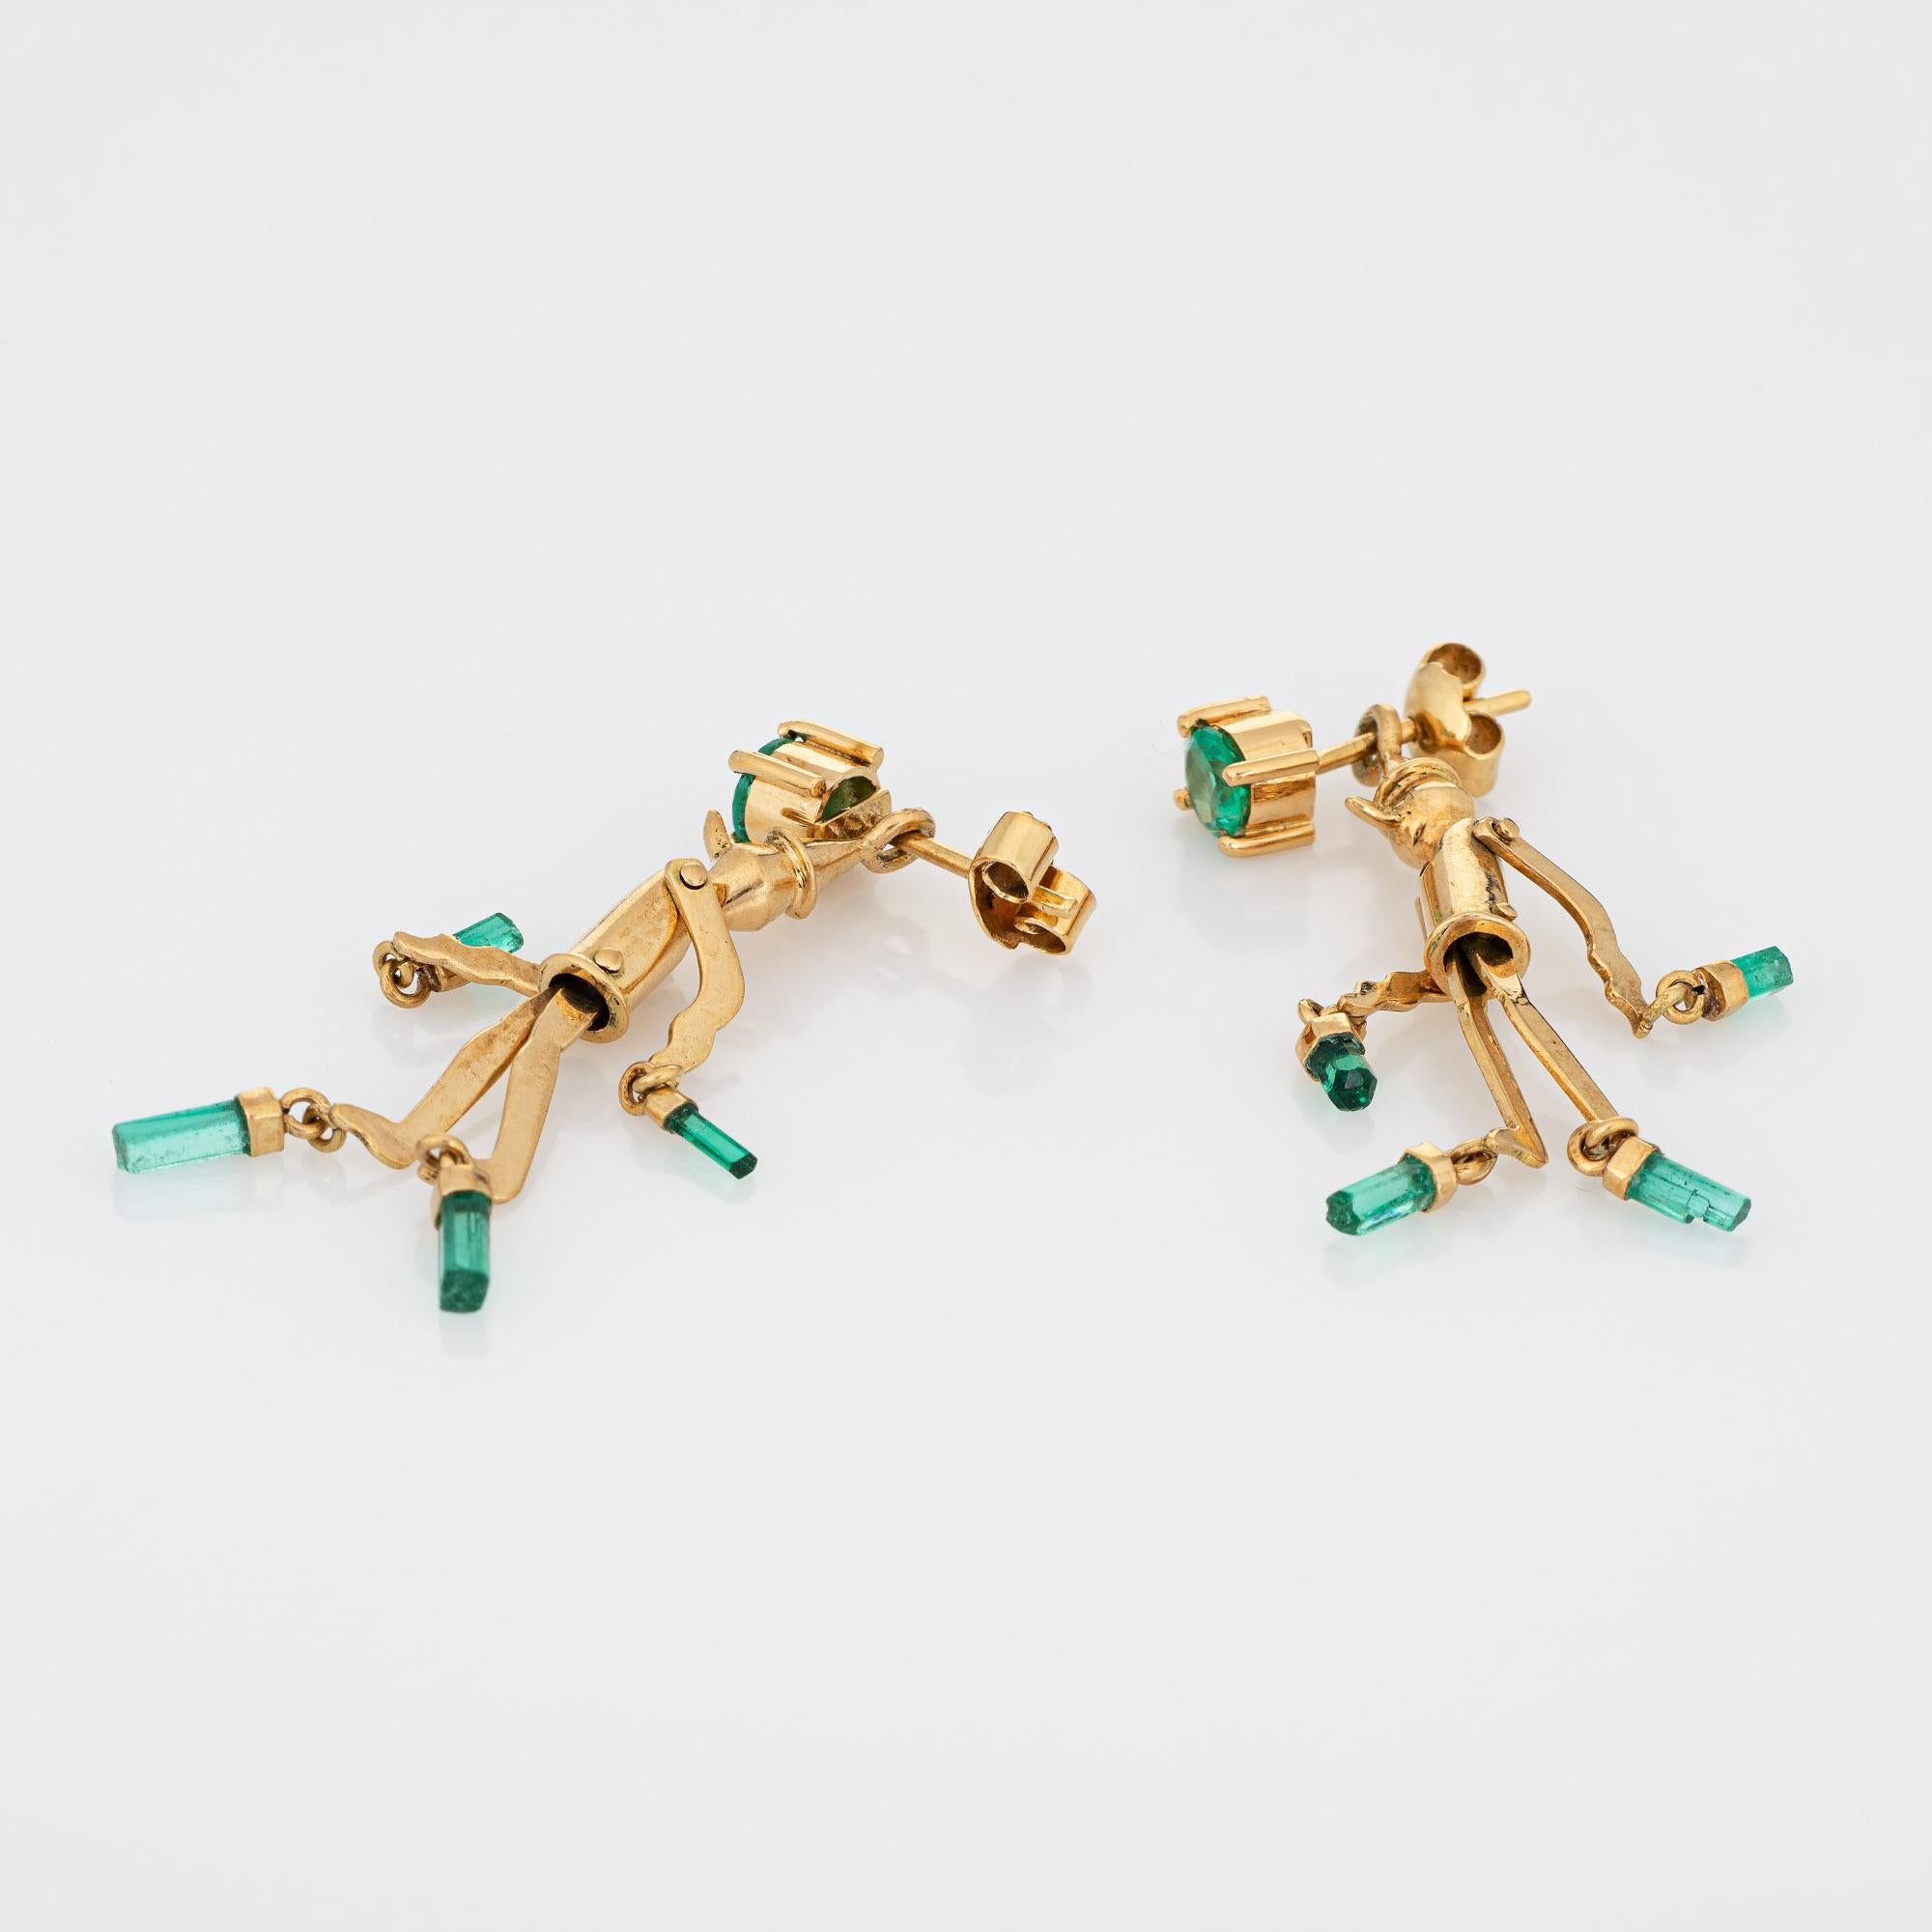 Fun pair of Pinocchio emerald earrings crafted in 18k yellow gold. 

Natural emeralds total an estimated 1.40 carats. 

Featuring the beloved Italian storybook character, who was carved from wood and known for his long nose that grew every time a